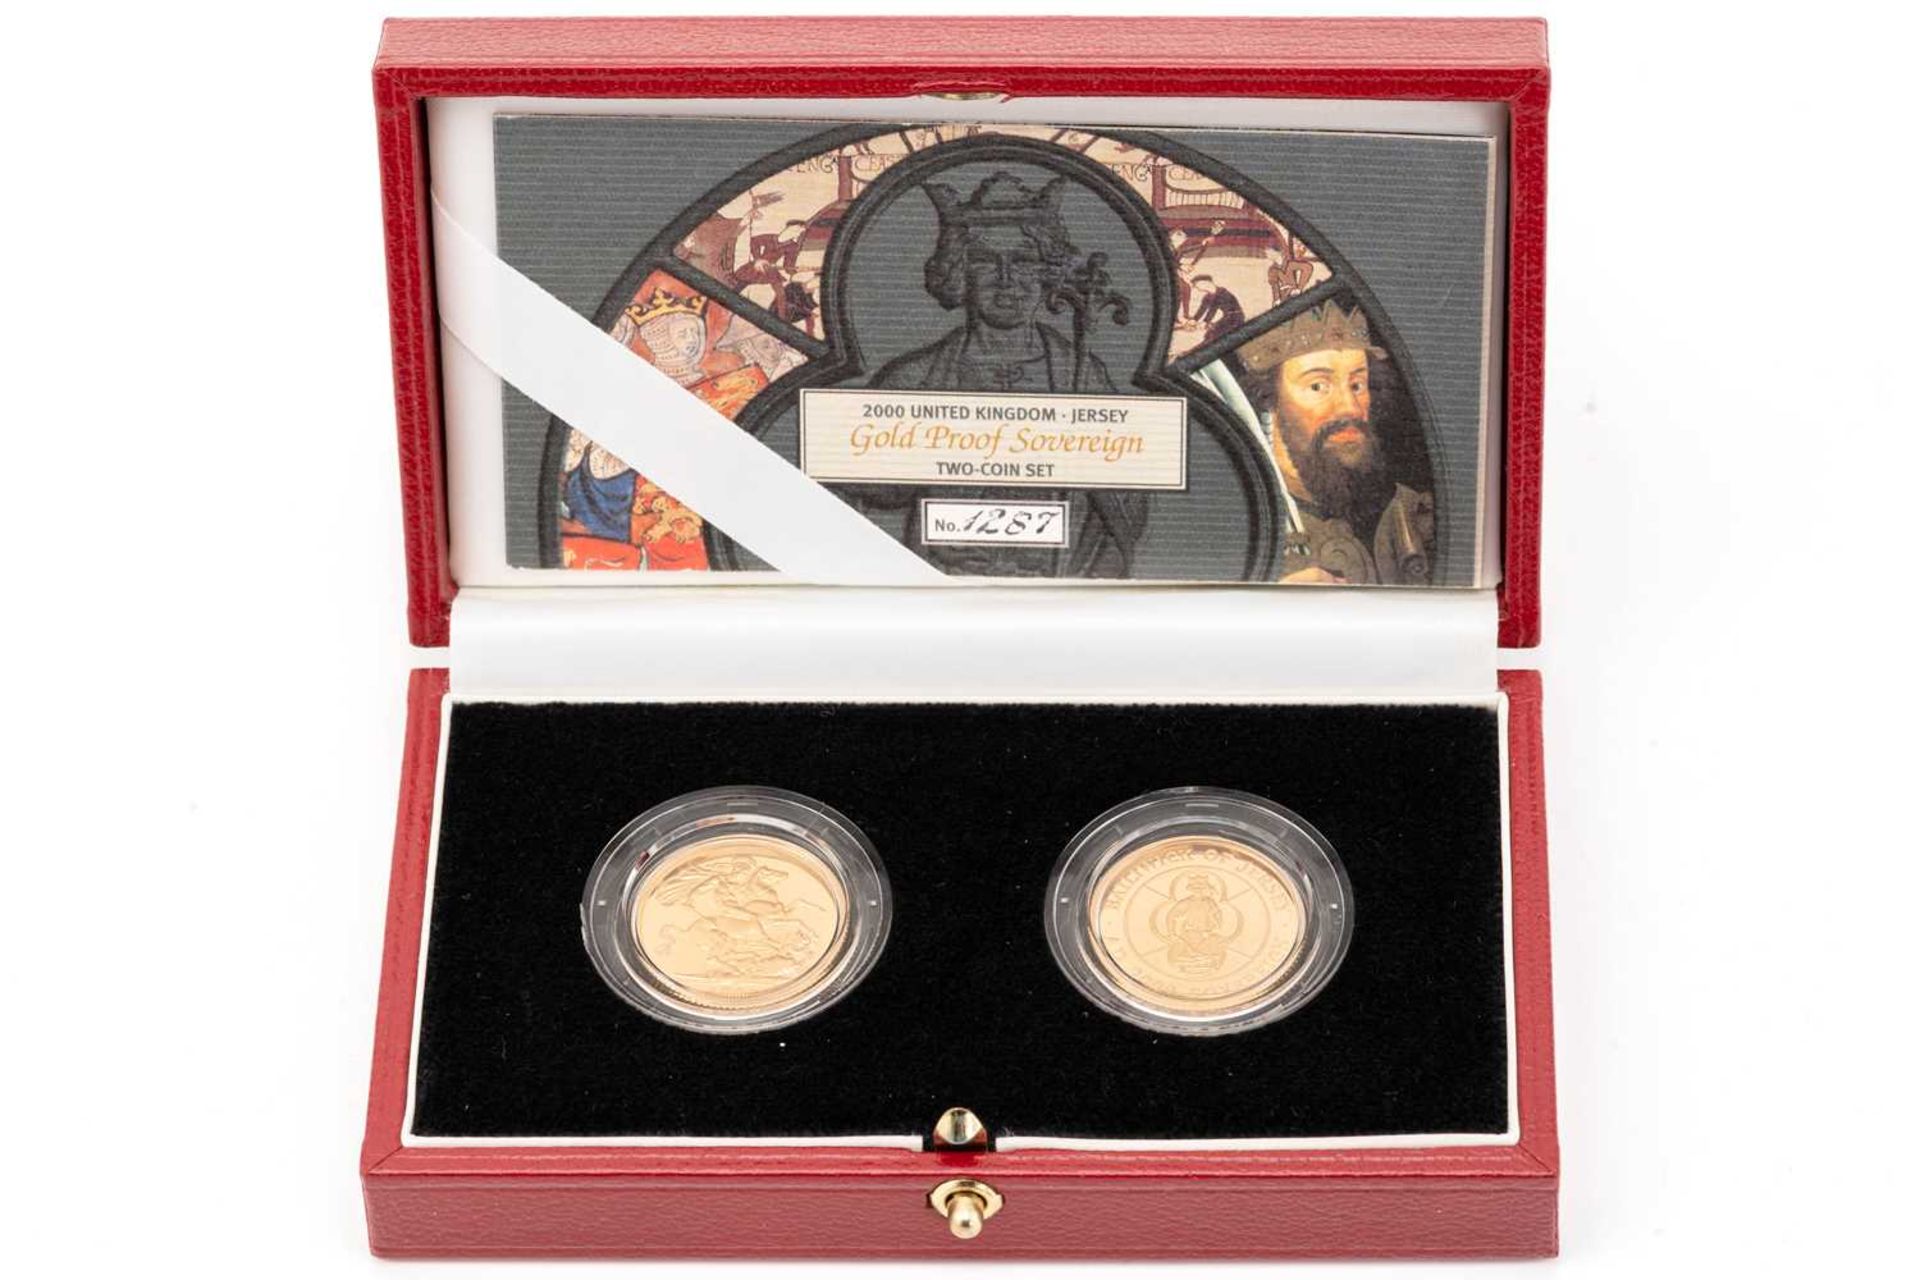 A 2000 United Kingdom gold proof two coin Jersey sovereign set; dated 2000. Number 1287 of a limited